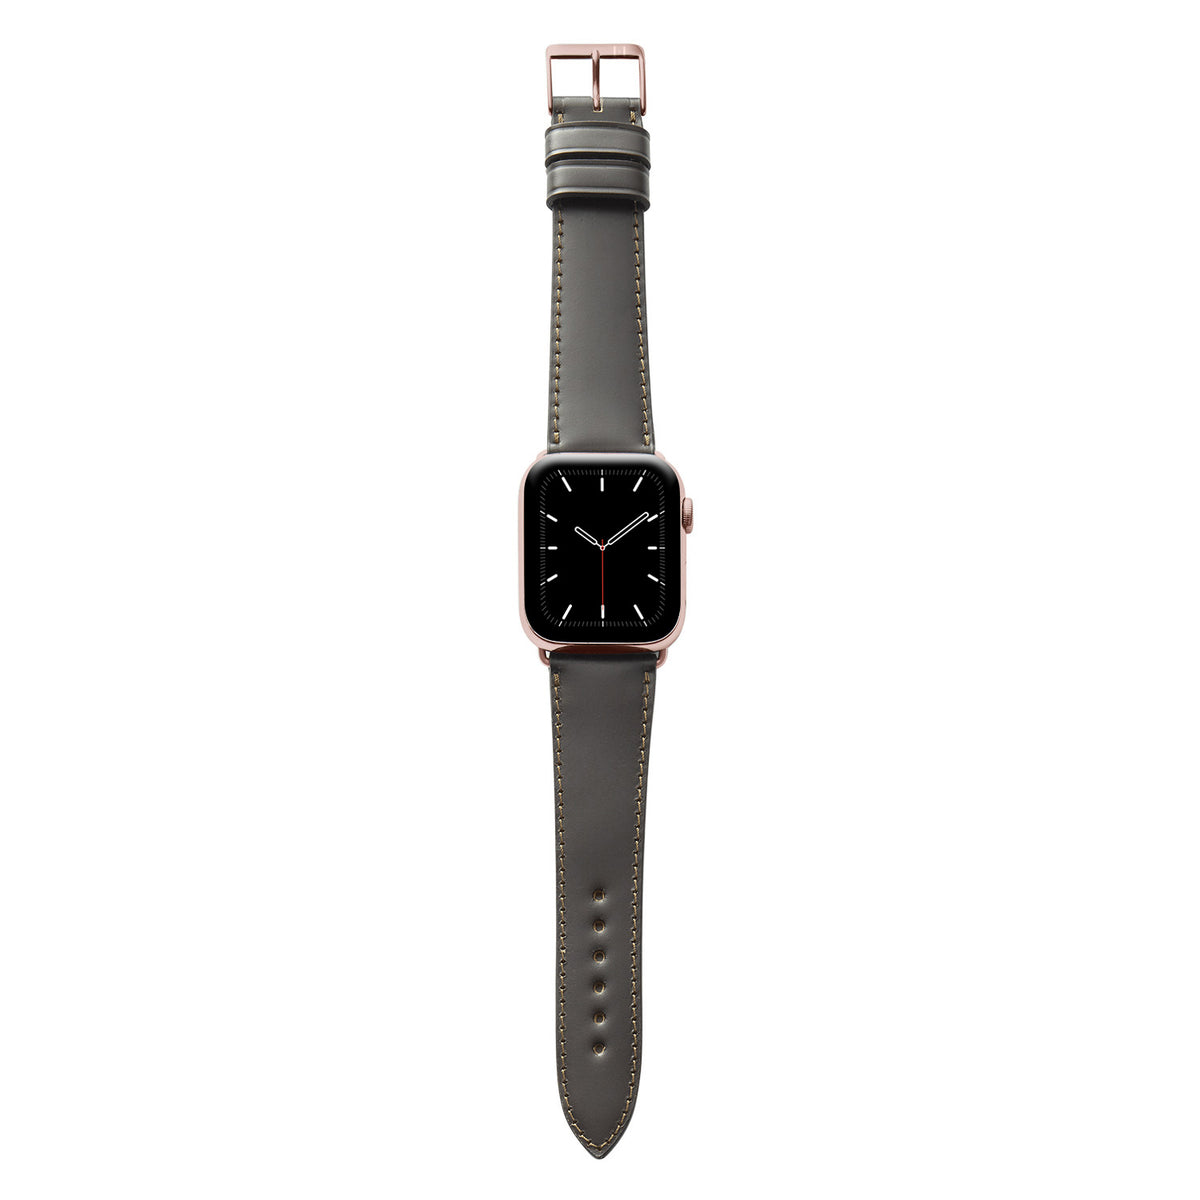 Apple Watch leather strap made of Shell Cordovan &quot;WINTERHUDE&quot; - Mocha